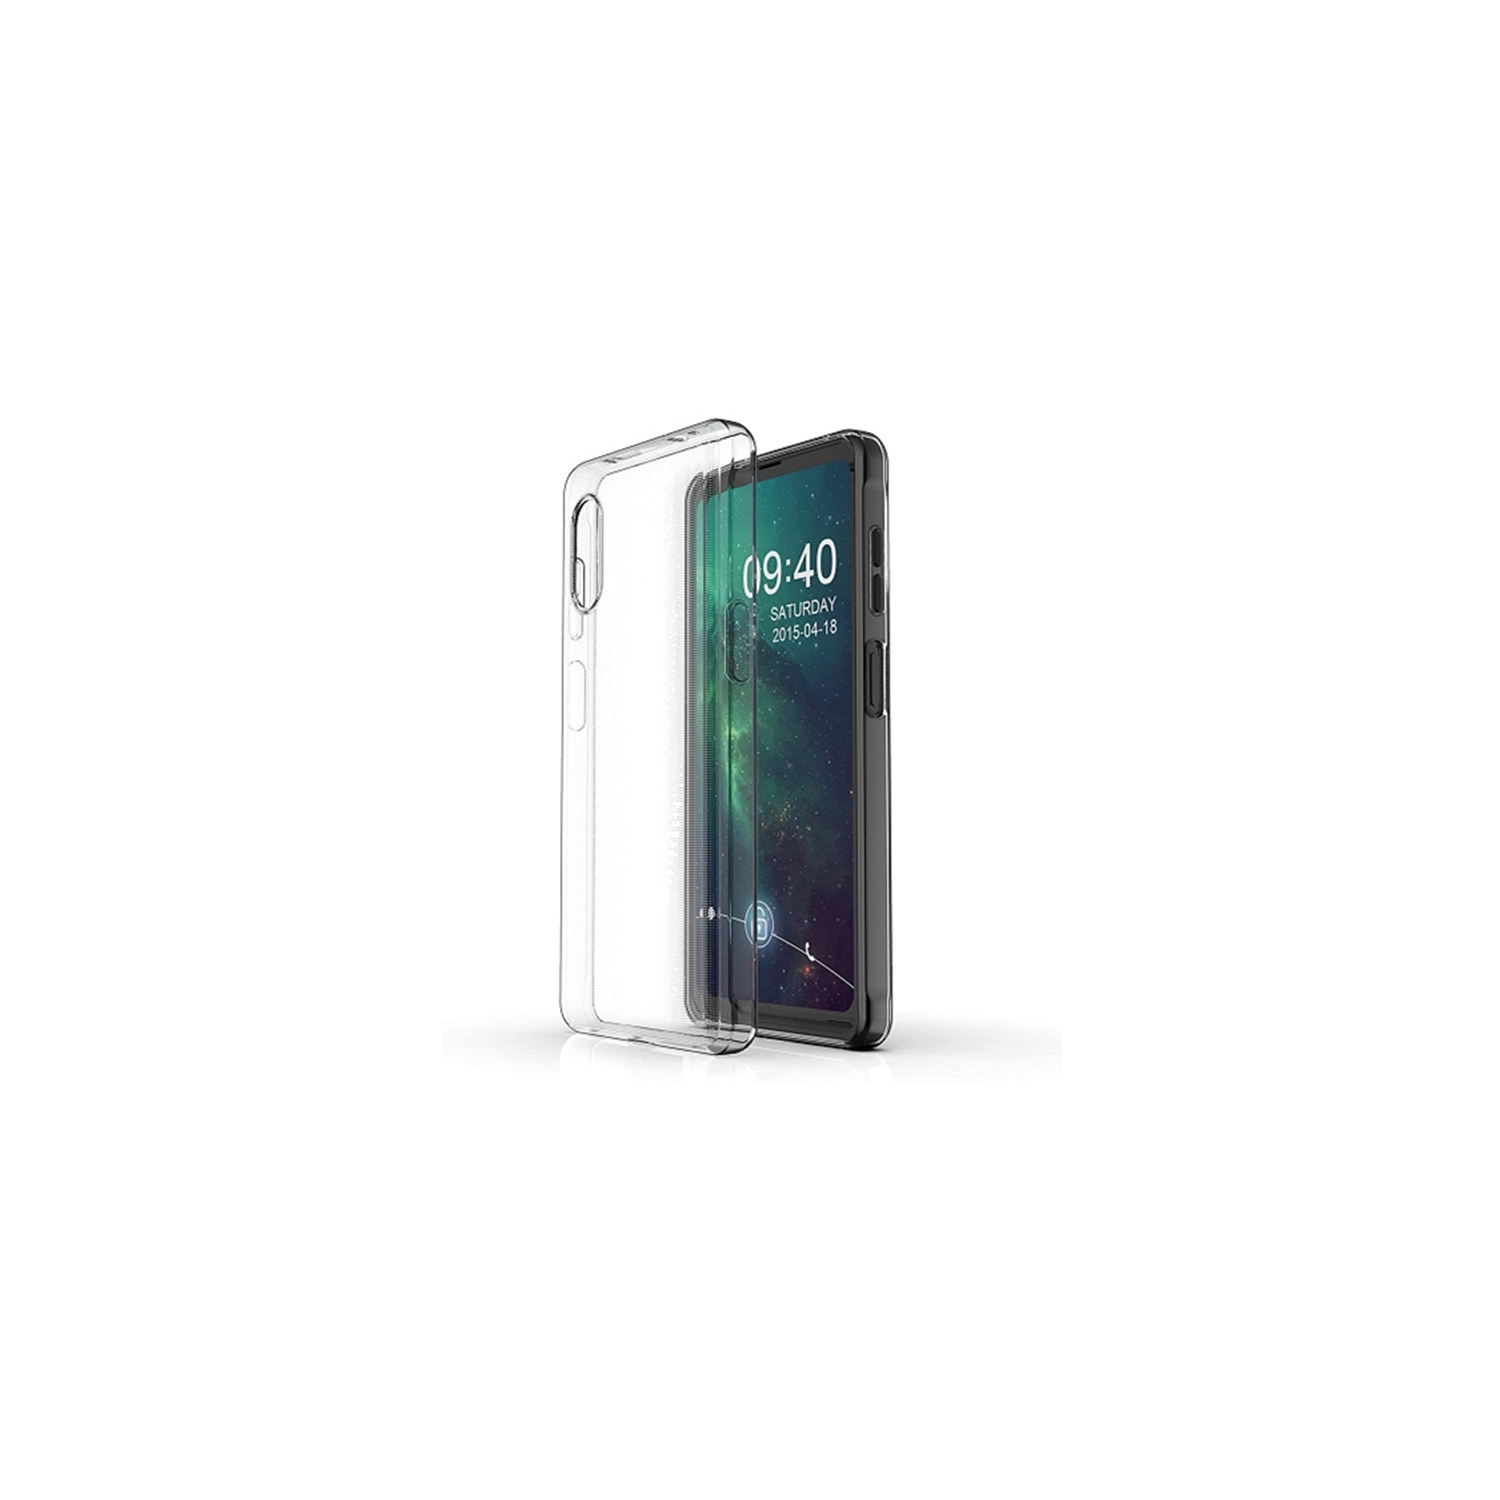 【CSmart】 Ultra Thin Soft TPU Silicone Jelly Bumper Back Cover Case for Samsung Galaxy Xcover Pro, Clear